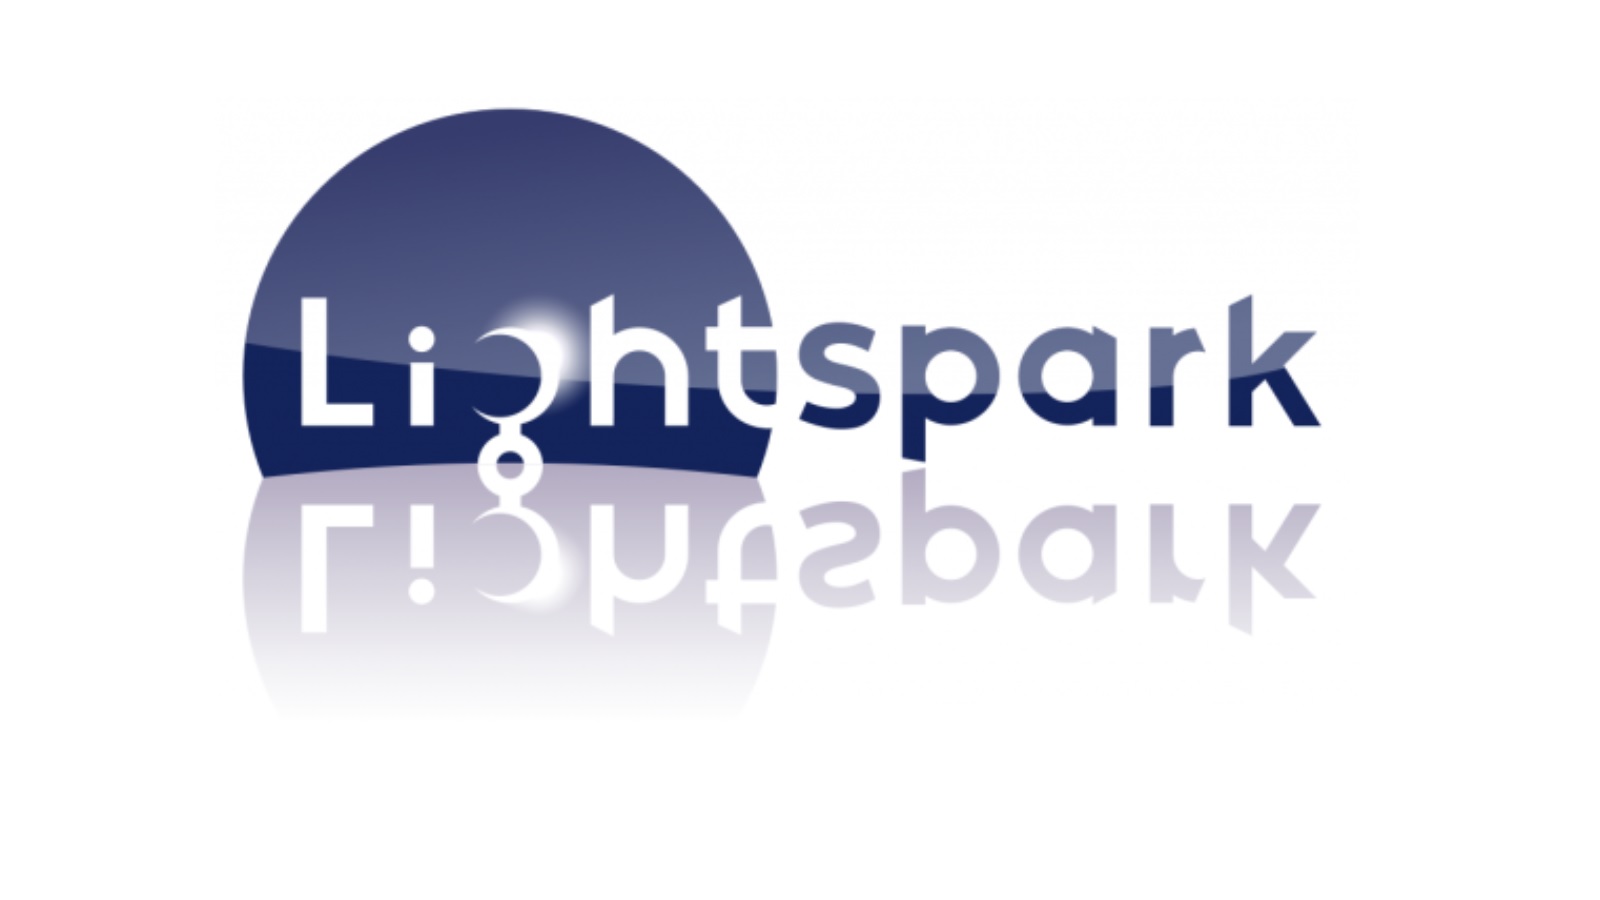 Lightspark is Flash player replacement and browser plugin for Windows and Linux.